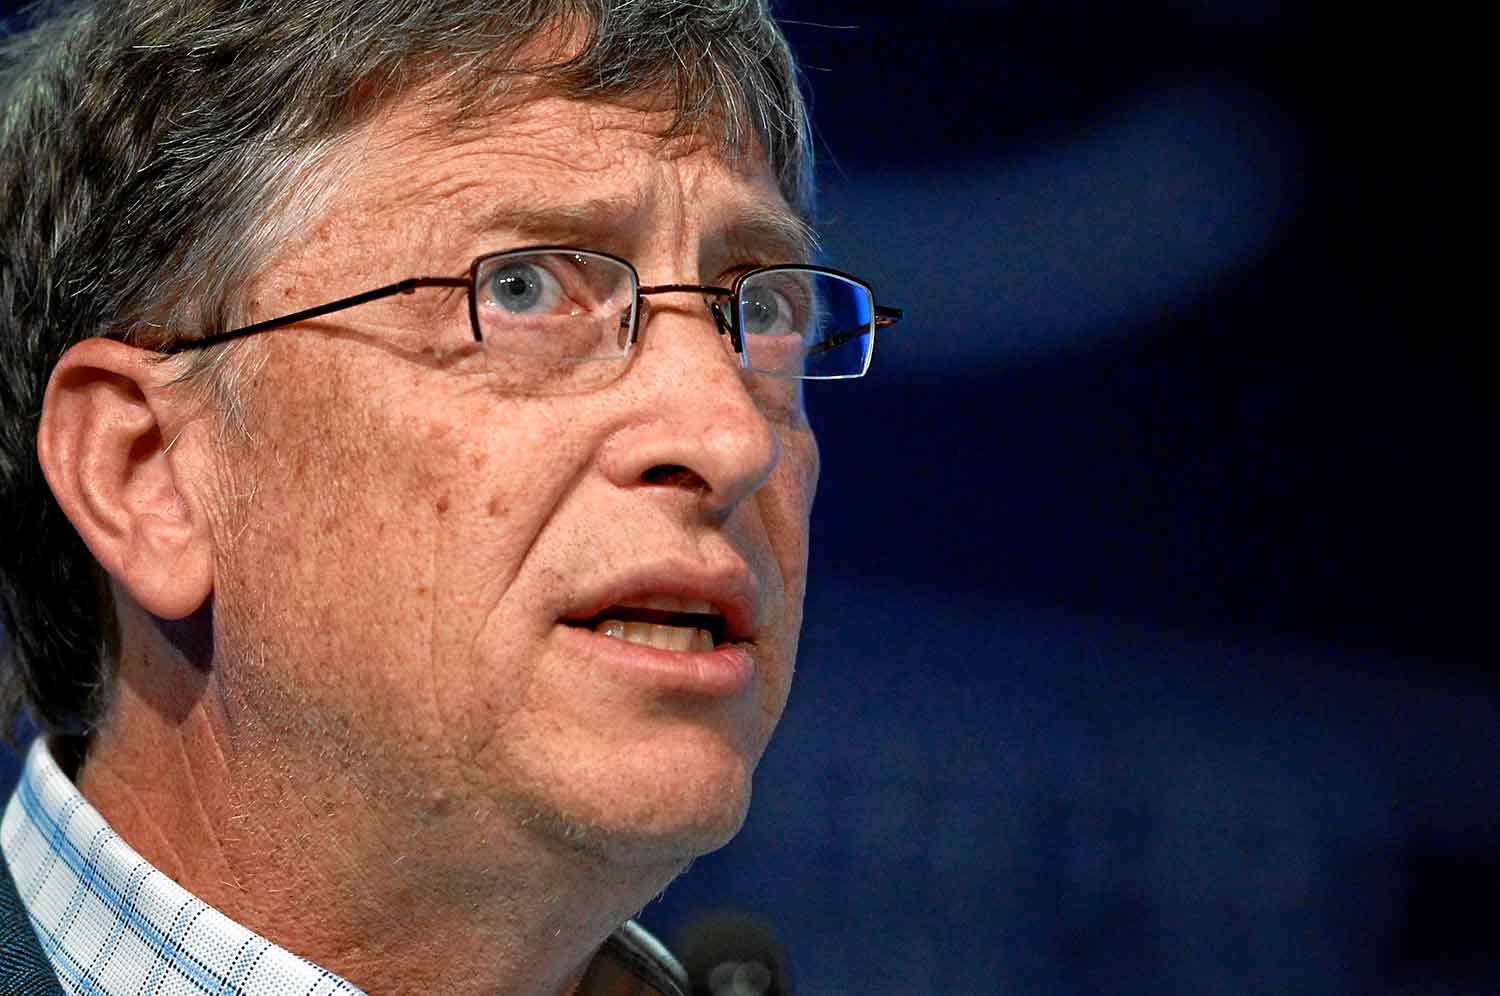 COVID-19: White House petition to investigate Bill Gates for 'medical malpractice' and 'crimes against humanity' gains momentum